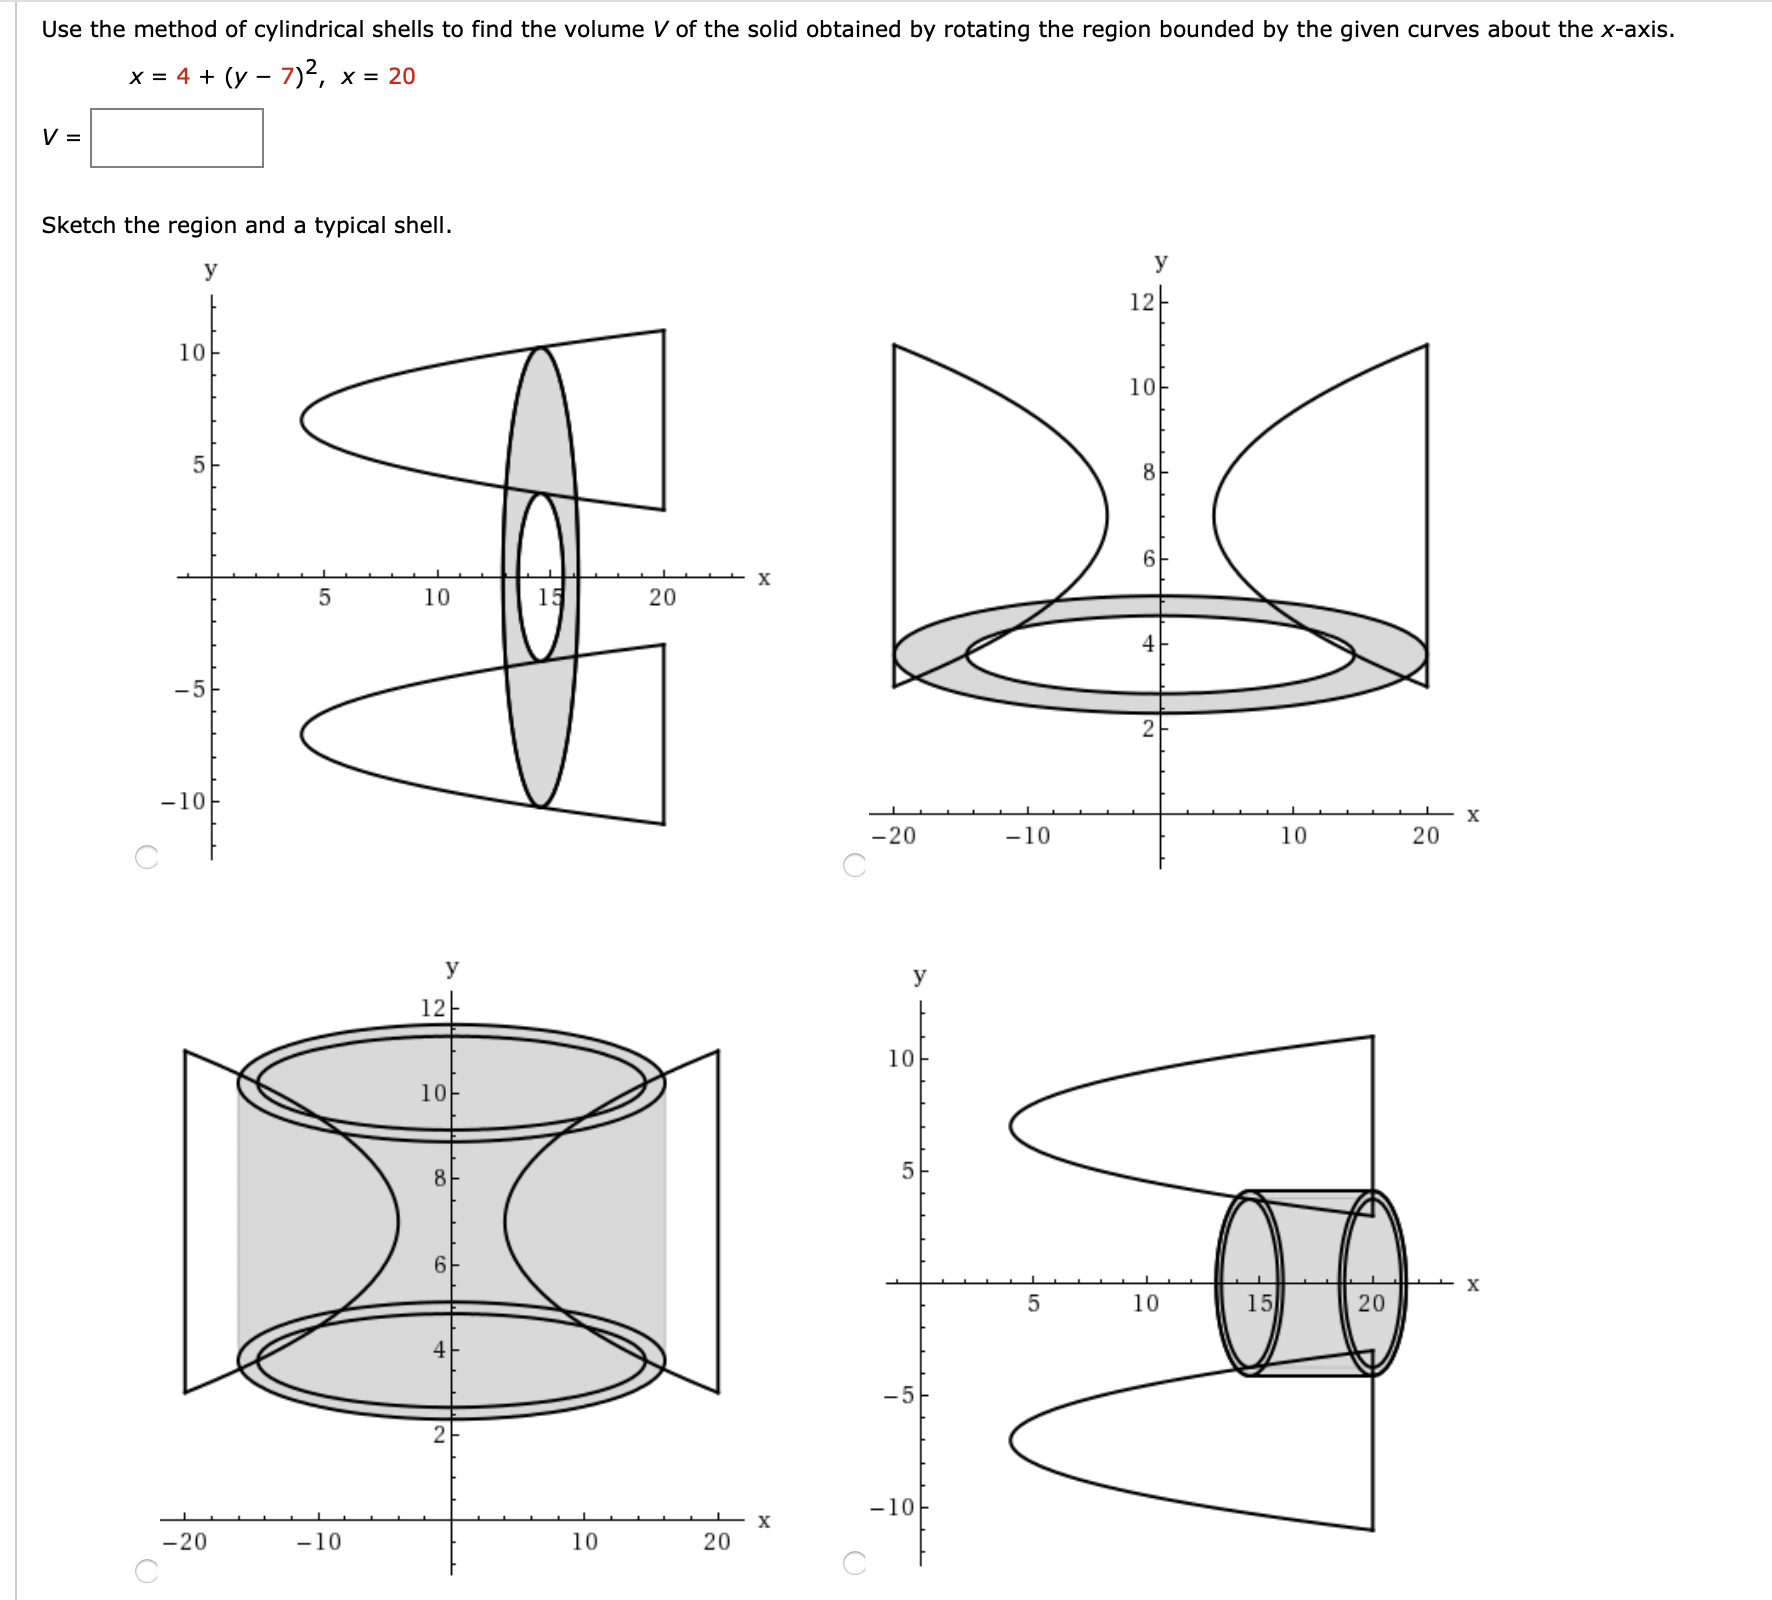 Use the method of cylindrical shells to find the volume V of the solid obtained by rotating the region bounded by the given curves about the x-axis.
x = 4 + (y – 7)2, x = 20
Sketch the region and a typical shell.
y
У
12-
10
10
8
х
10
15
20
4
-5
-10
х
-20
-10
10
20
У
У
12-
10
10-
8
х
10
15
20
-5
-10
х
-20
-10
10
20
